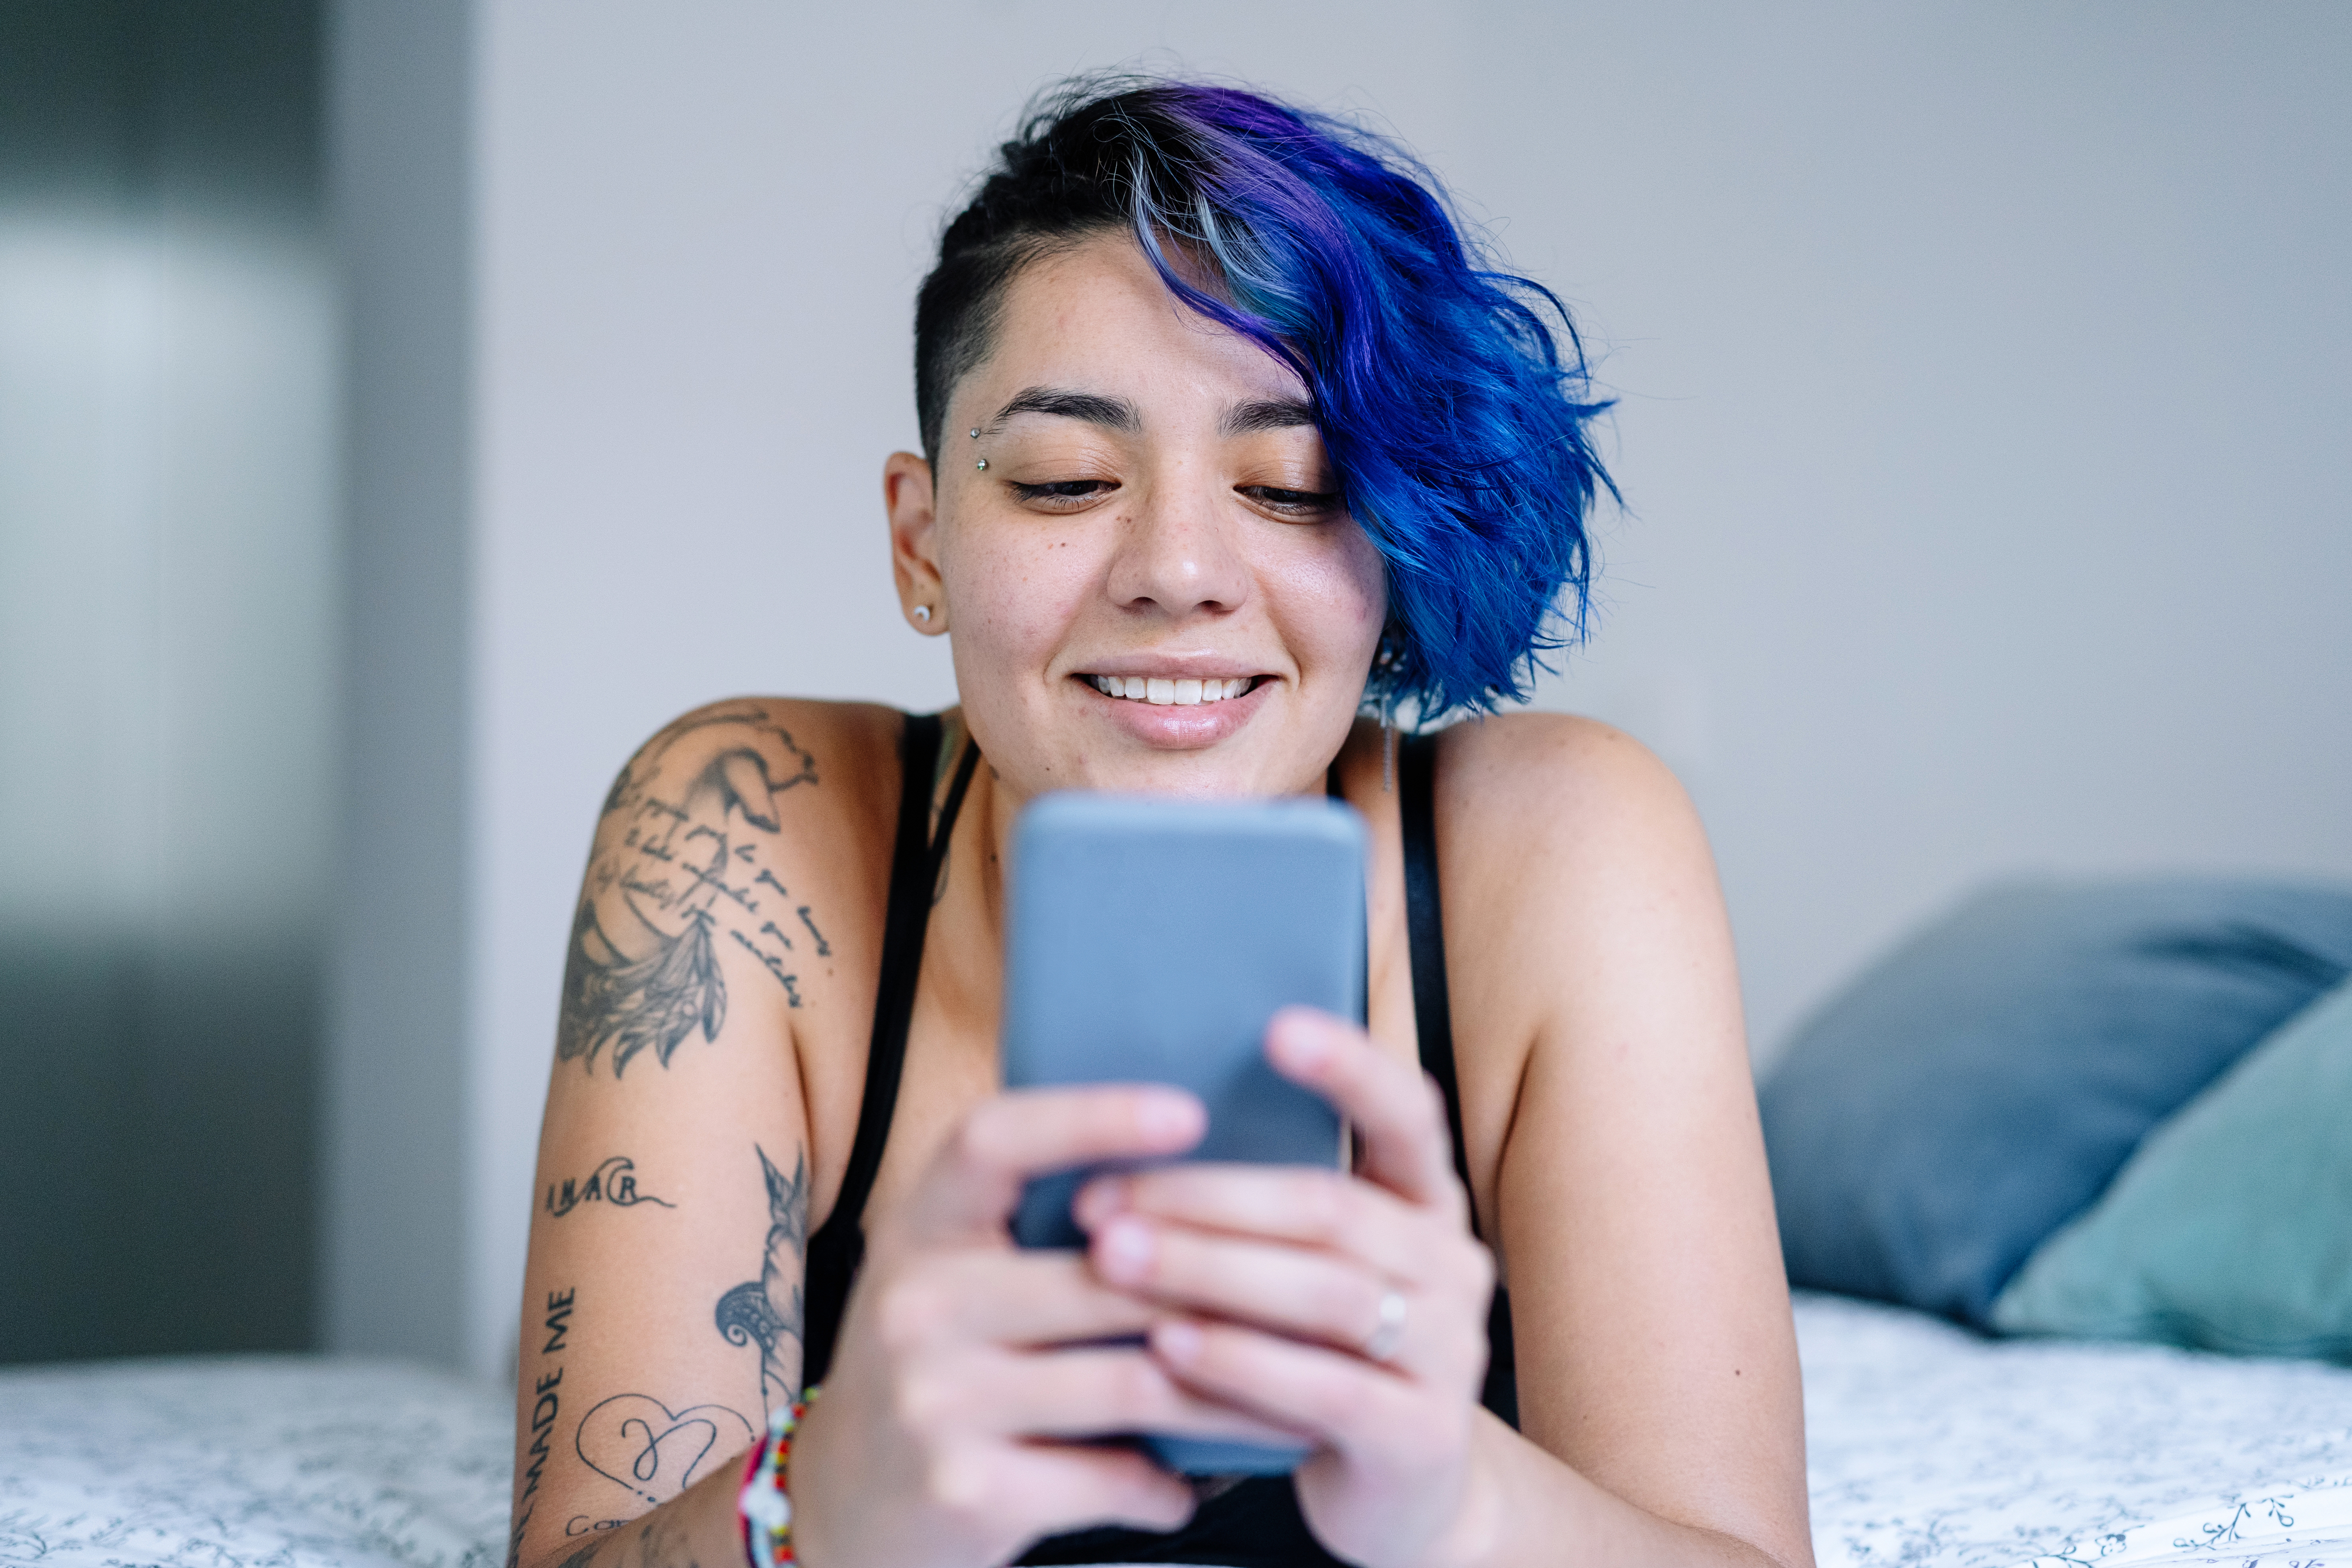 Person with blue hair smiling, holding a smartphone, tattoos visible on arms